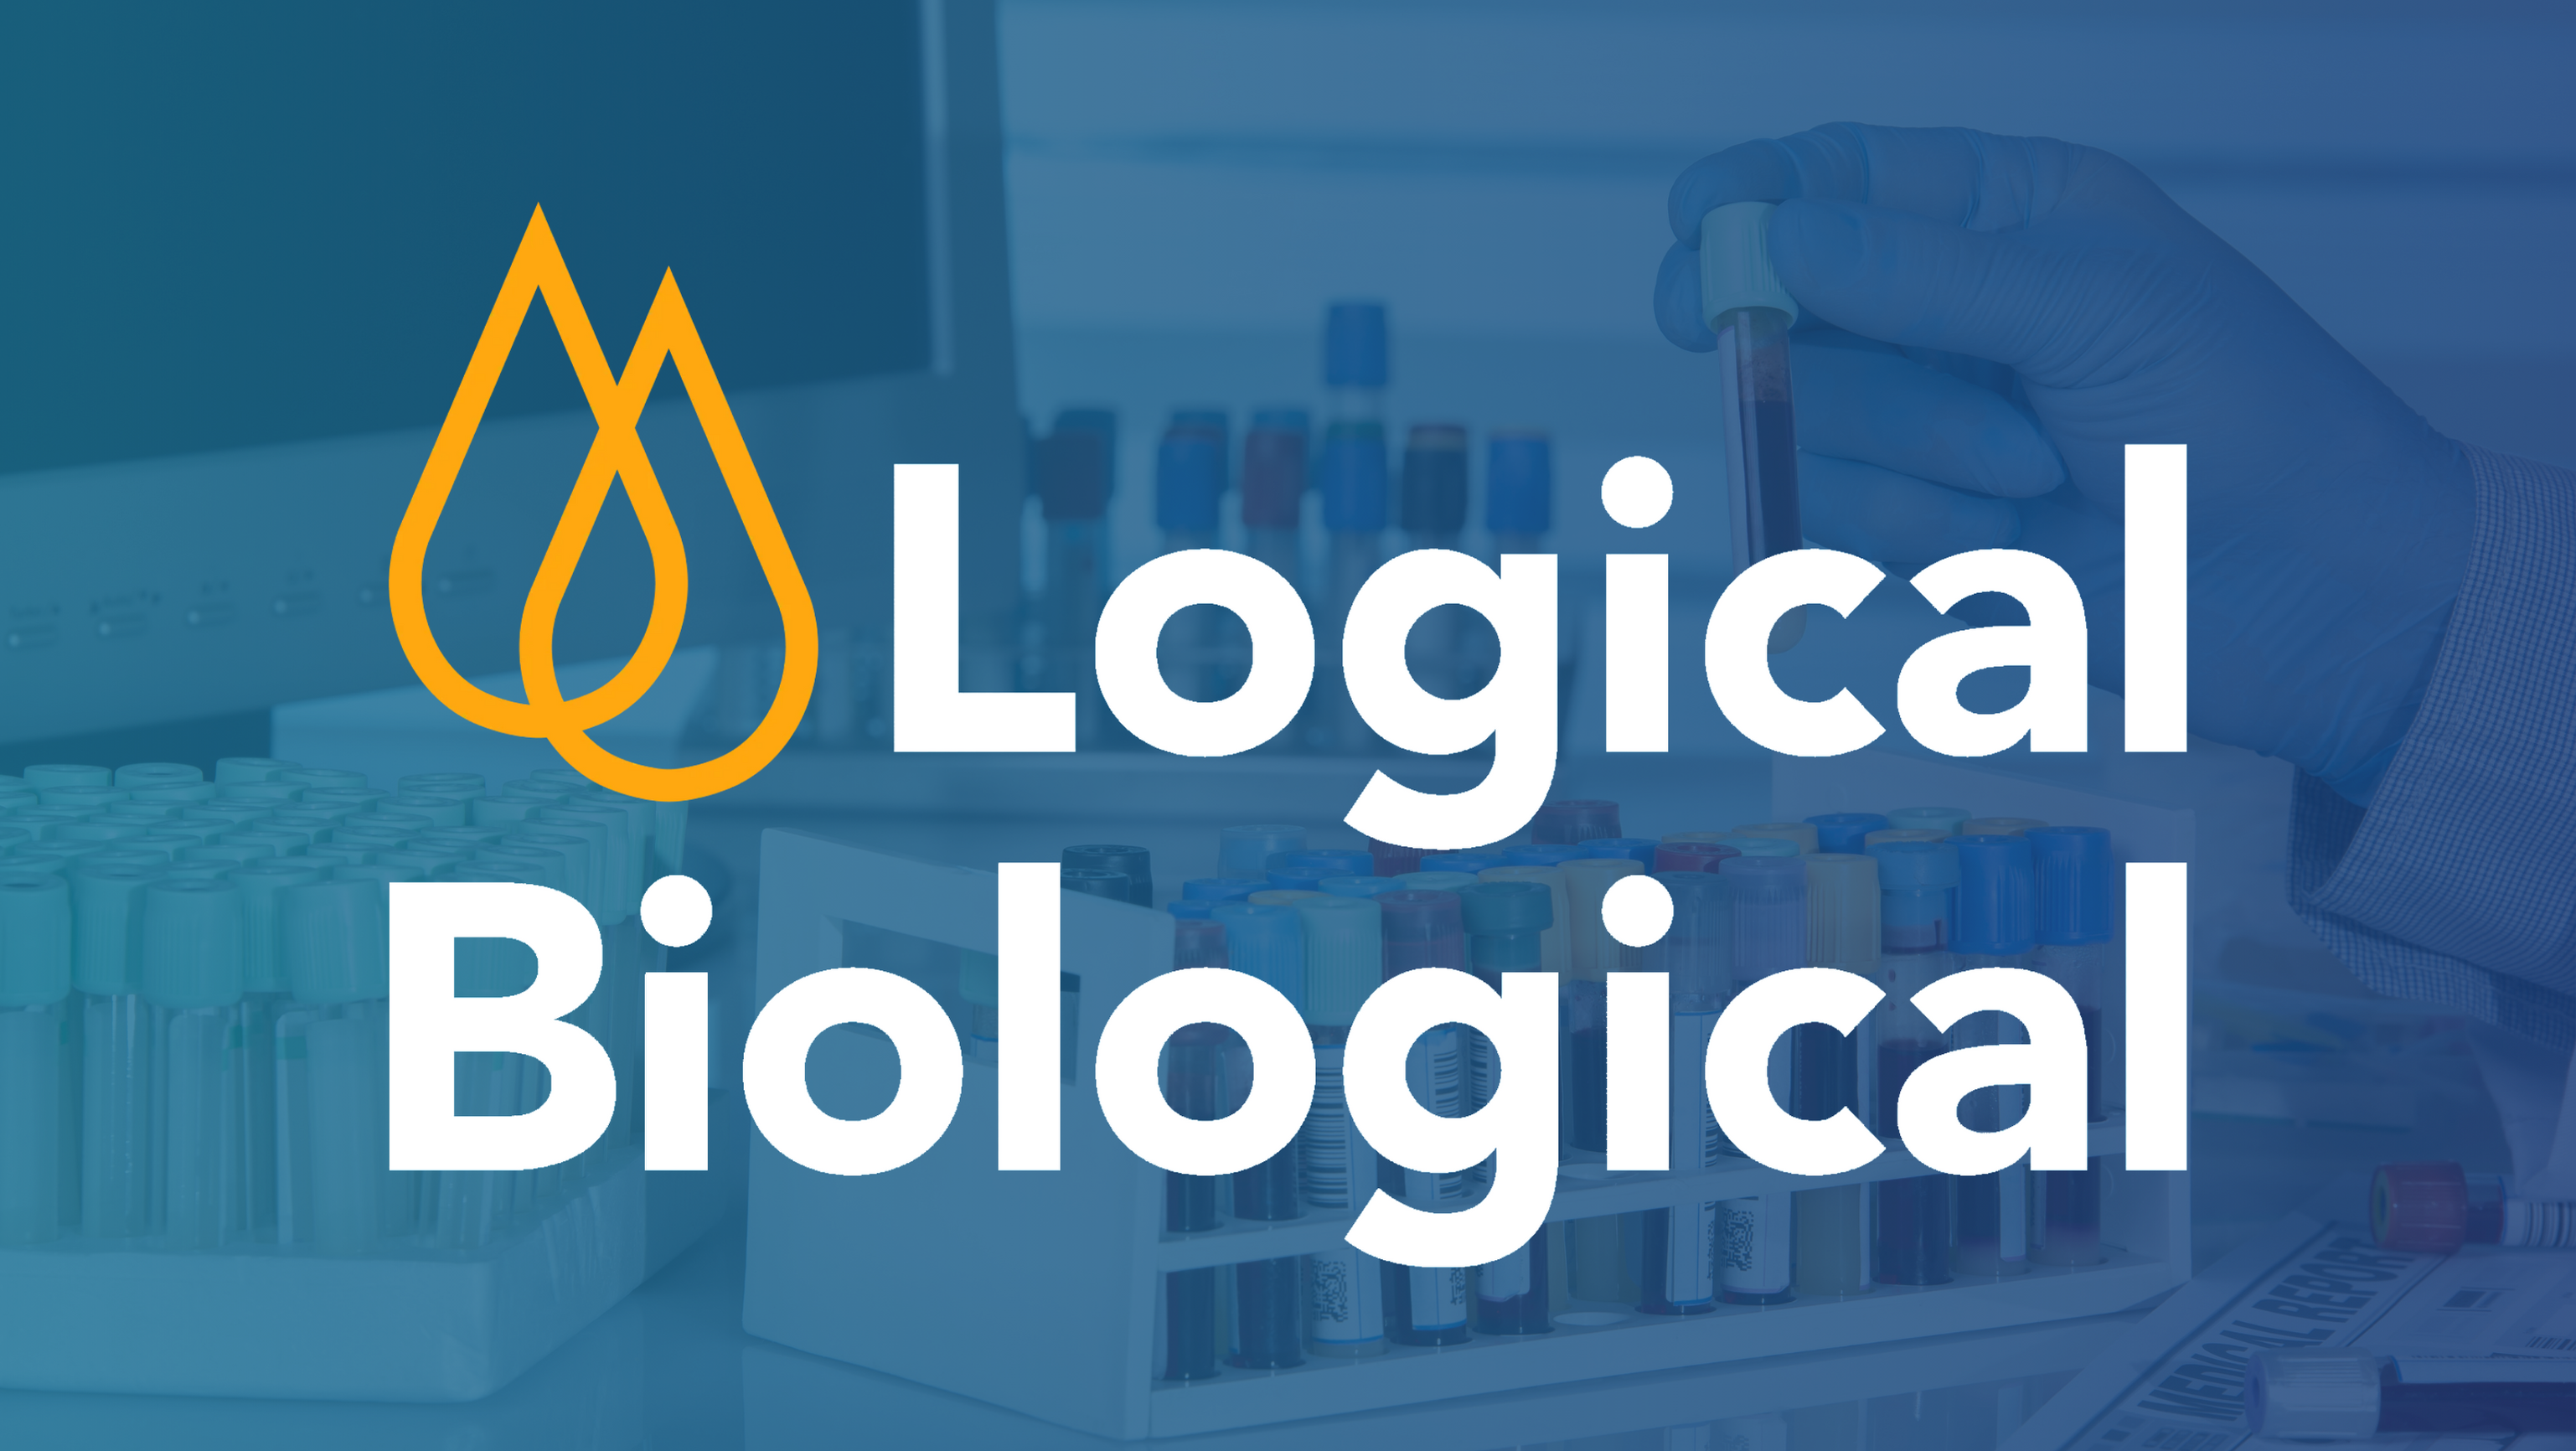 Logical Biological Recognized as one of ‘Europe’s Fastest Growing Companies’ due to Customer Centric approach and Quality Commitment